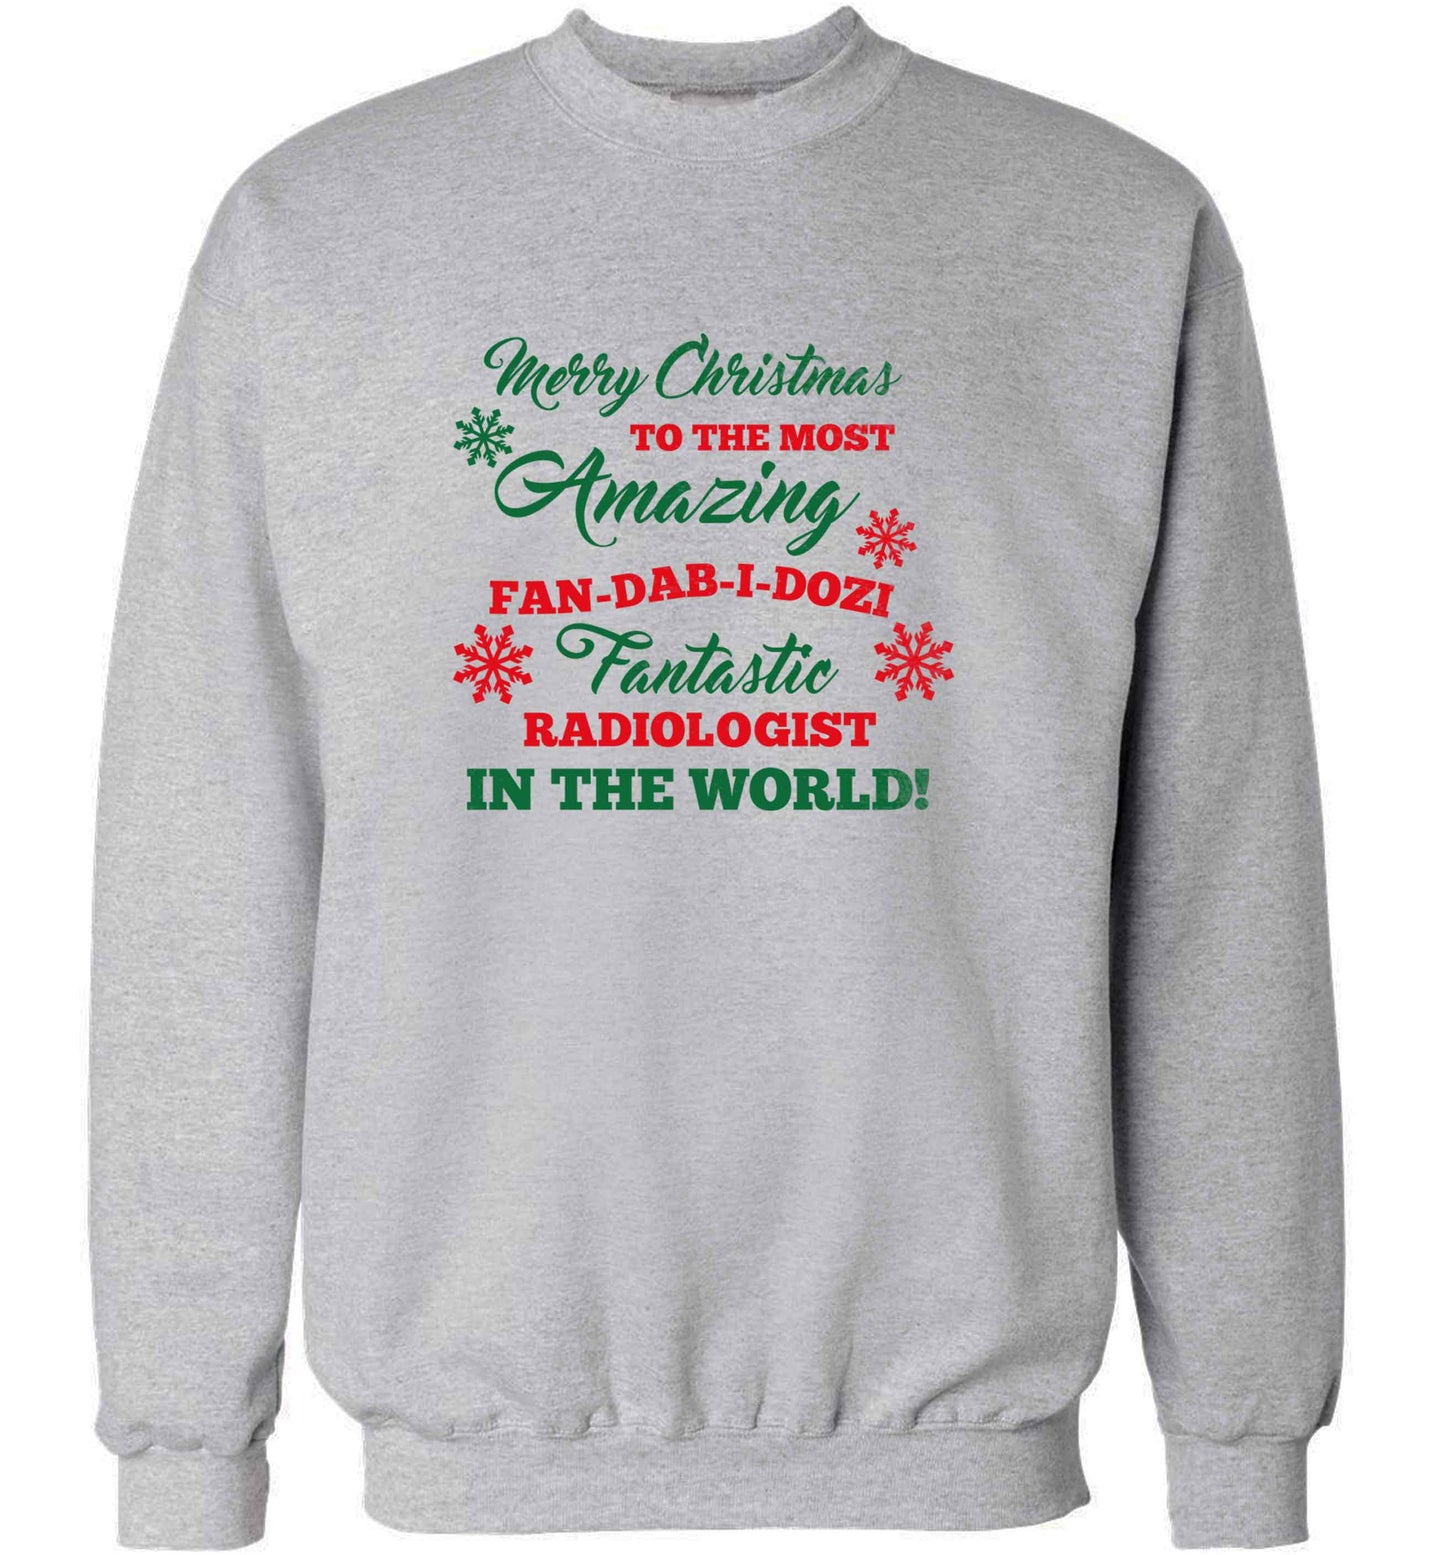 Merry Christmas to the most amazing radiologist in the world! adult's unisex grey sweater 2XL